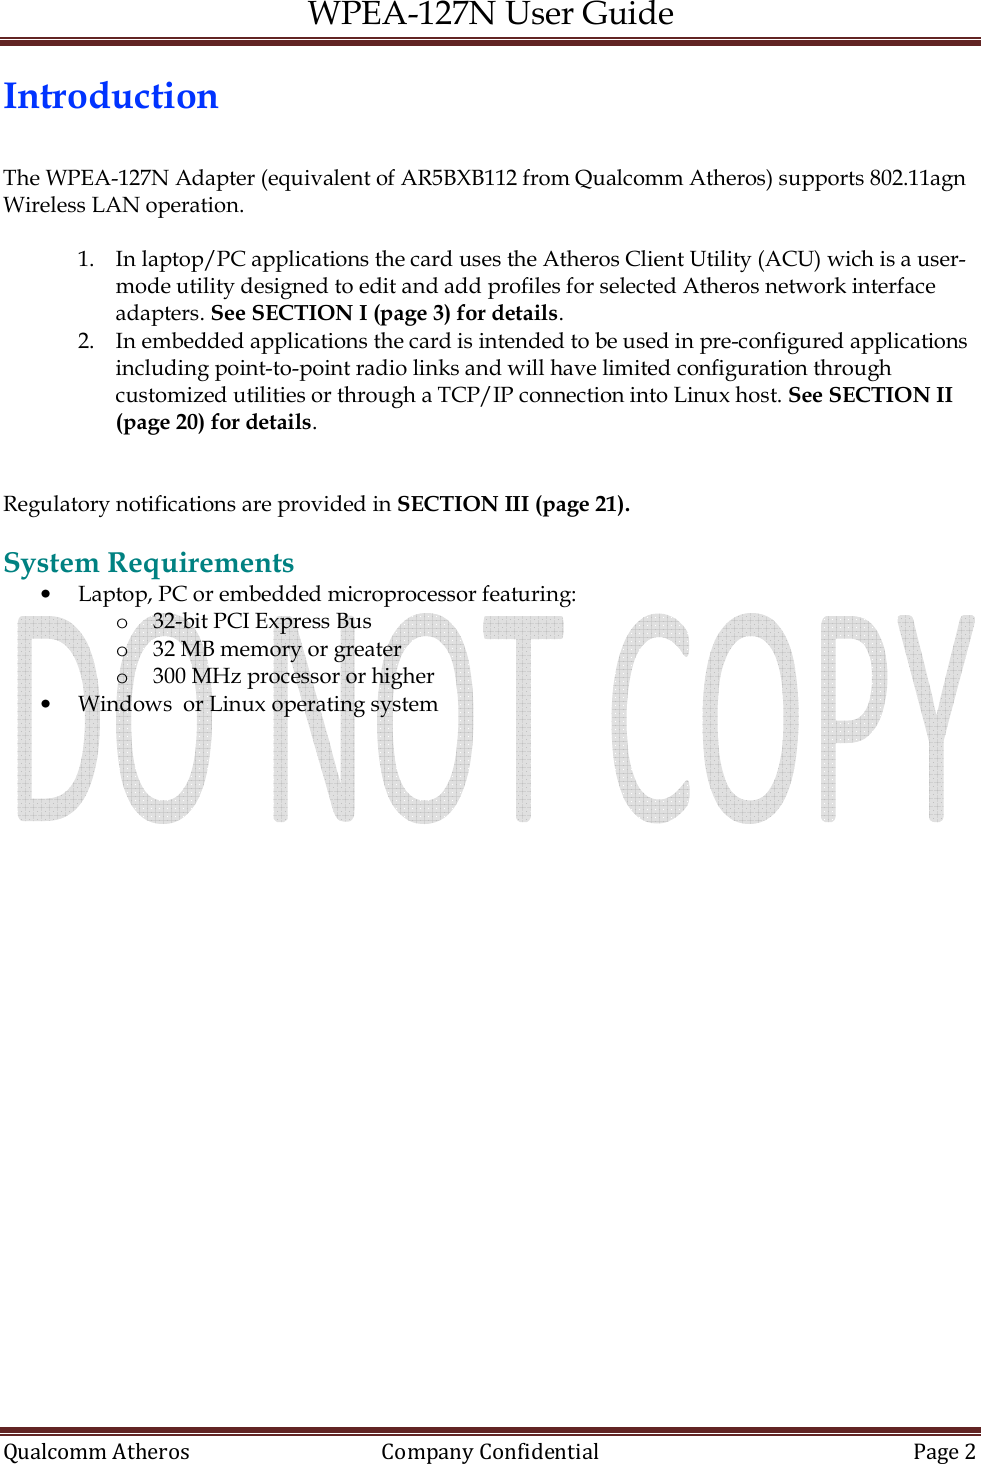 WPEA-127N User Guide  Qualcomm Atheros   Company Confidential  Page 2  Introduction  The WPEA-127N Adapter (equivalent of AR5BXB112 from Qualcomm Atheros) supports 802.11agn Wireless LAN operation.  1. In laptop/PC applications the card uses the Atheros Client Utility (ACU) wich is a user-mode utility designed to edit and add profiles for selected Atheros network interface adapters. See SECTION I (page 3) for details. 2. In embedded applications the card is intended to be used in pre-configured applications including point-to-point radio links and will have limited configuration through customized utilities or through a TCP/IP connection into Linux host. See SECTION II (page 20) for details.   Regulatory notifications are provided in SECTION III (page 21).  System Requirements • Laptop, PC or embedded microprocessor featuring: o 32-bit PCI Express Bus o 32 MB memory or greater o 300 MHz processor or higher • Windows  or Linux operating system   